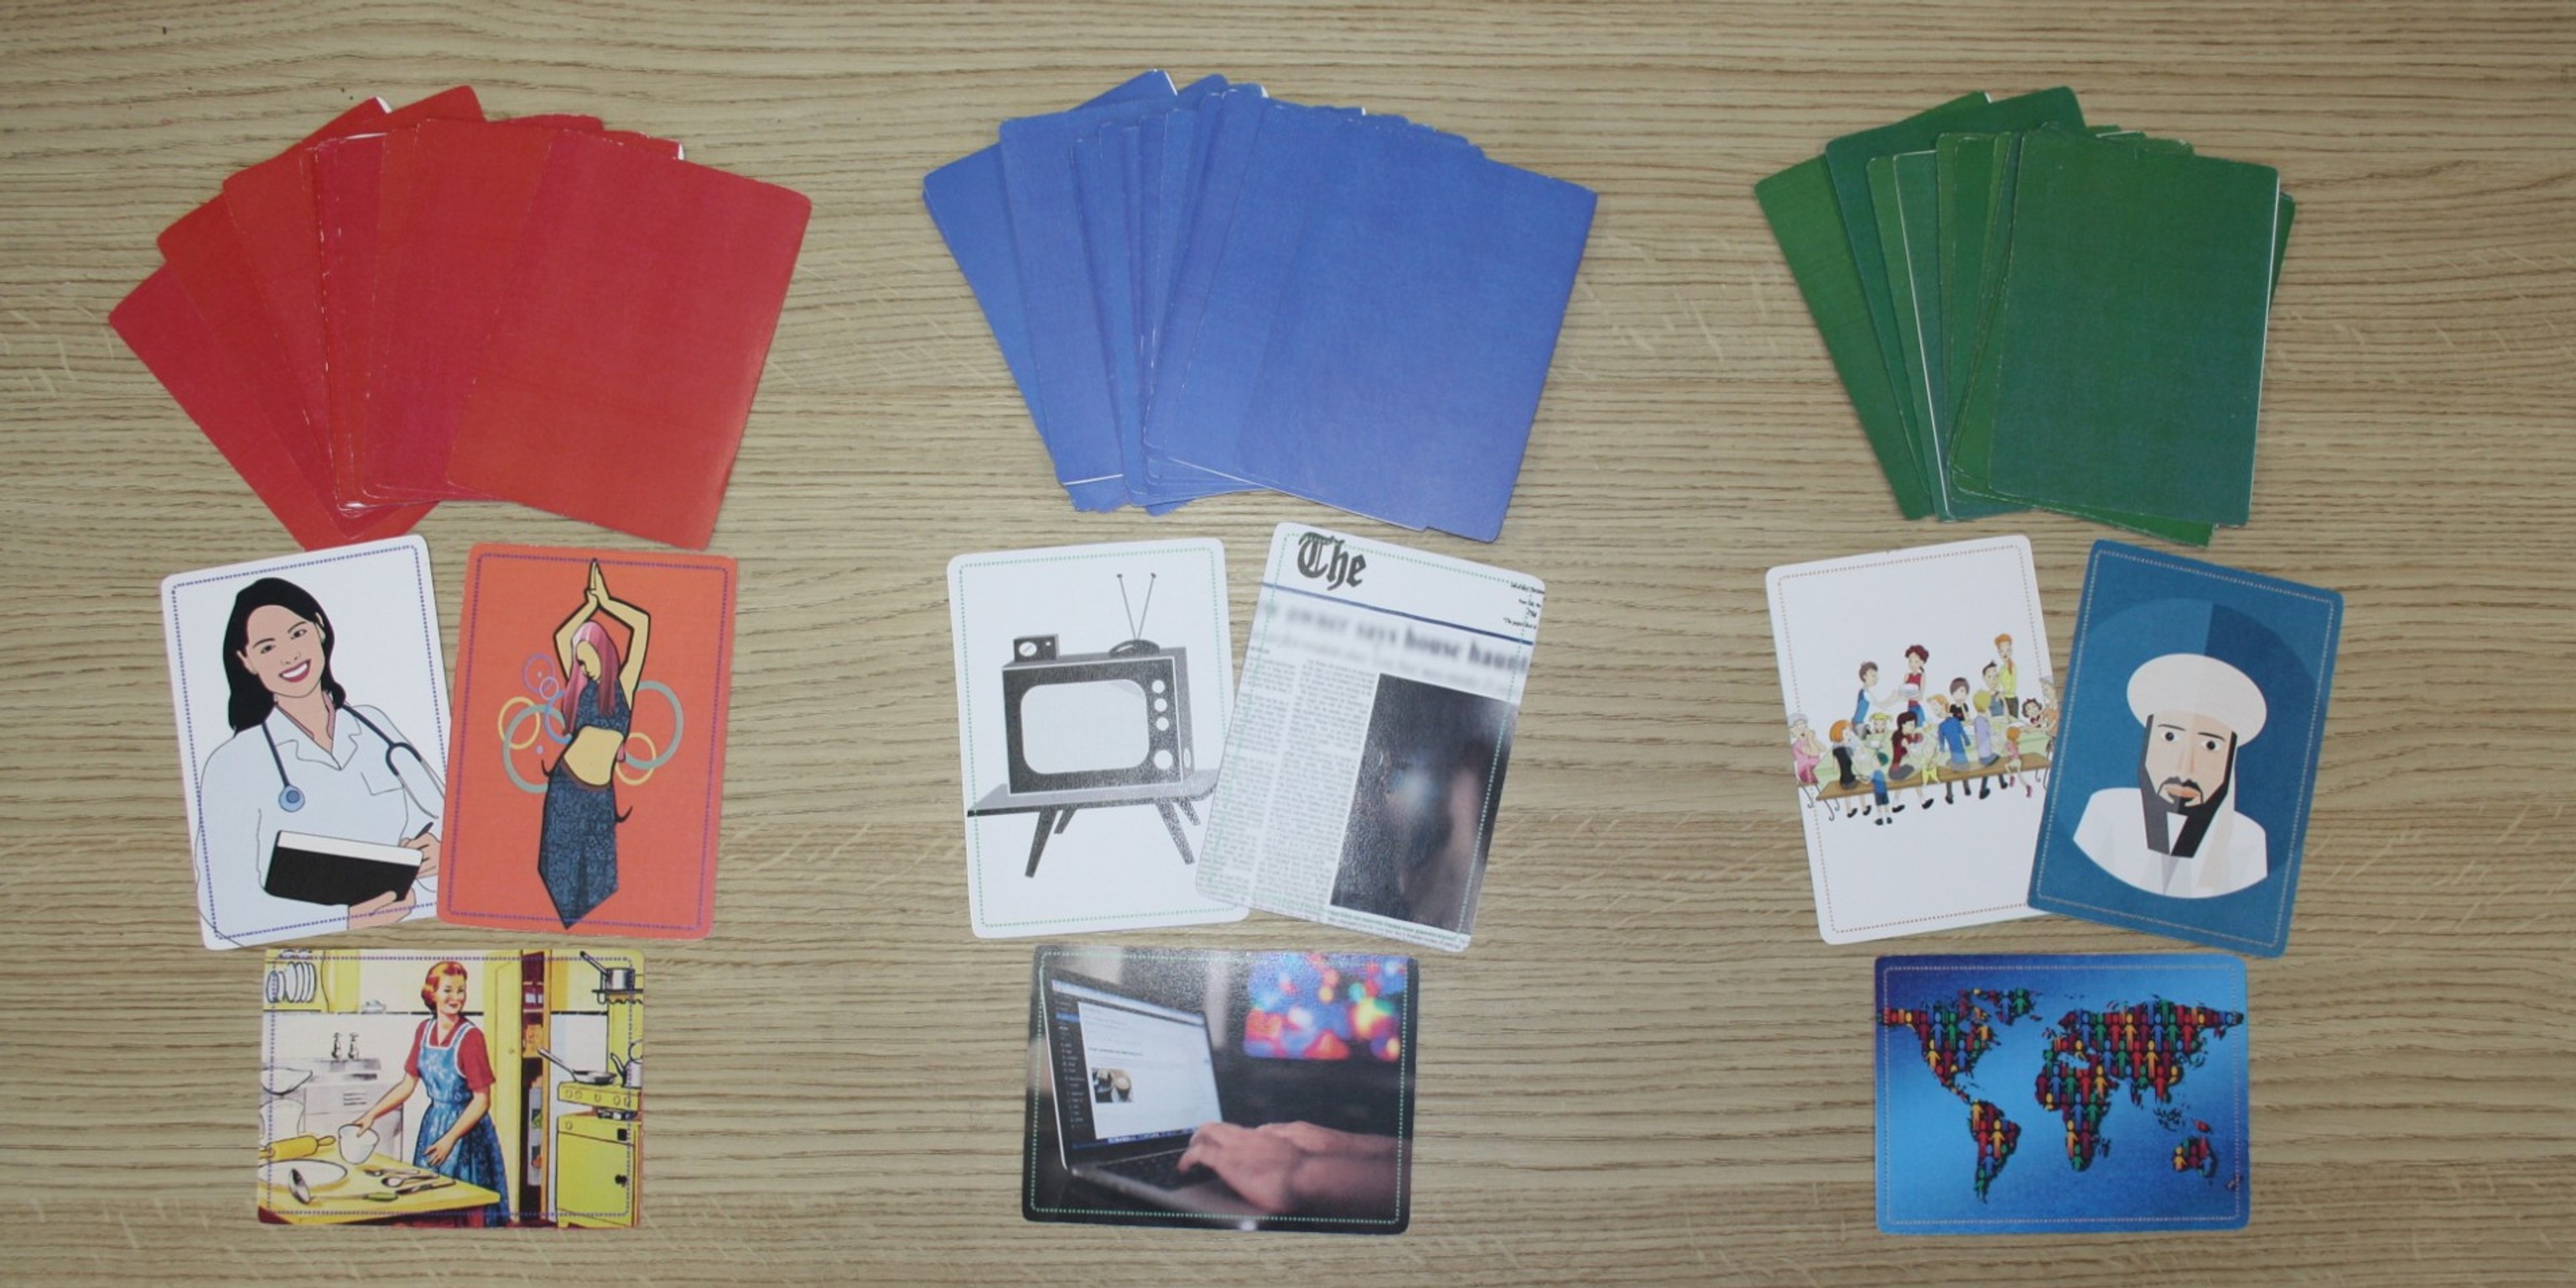 Scenario co-creation cards: A tool for eliciting values